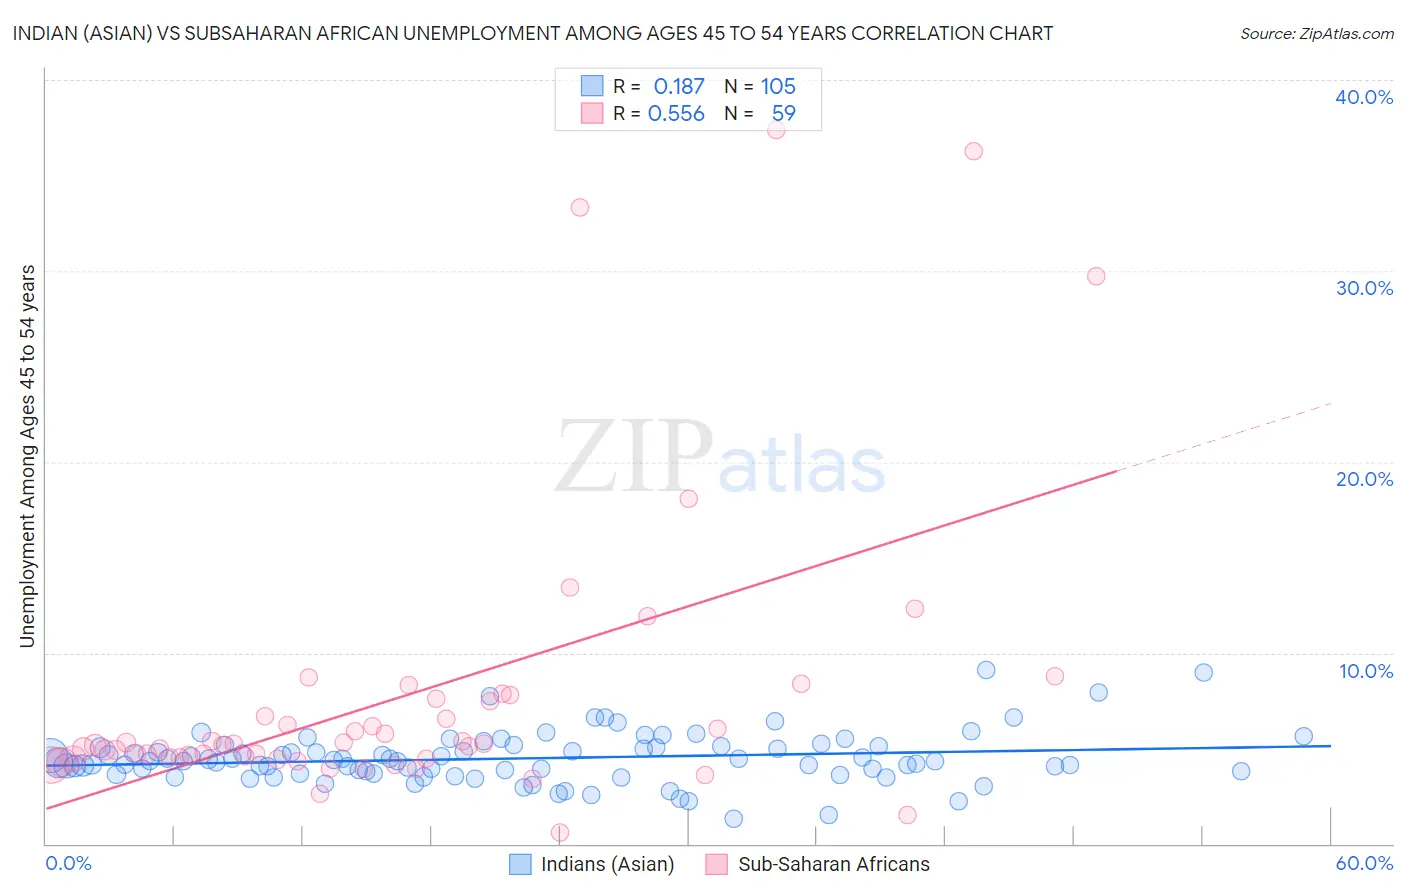 Indian (Asian) vs Subsaharan African Unemployment Among Ages 45 to 54 years